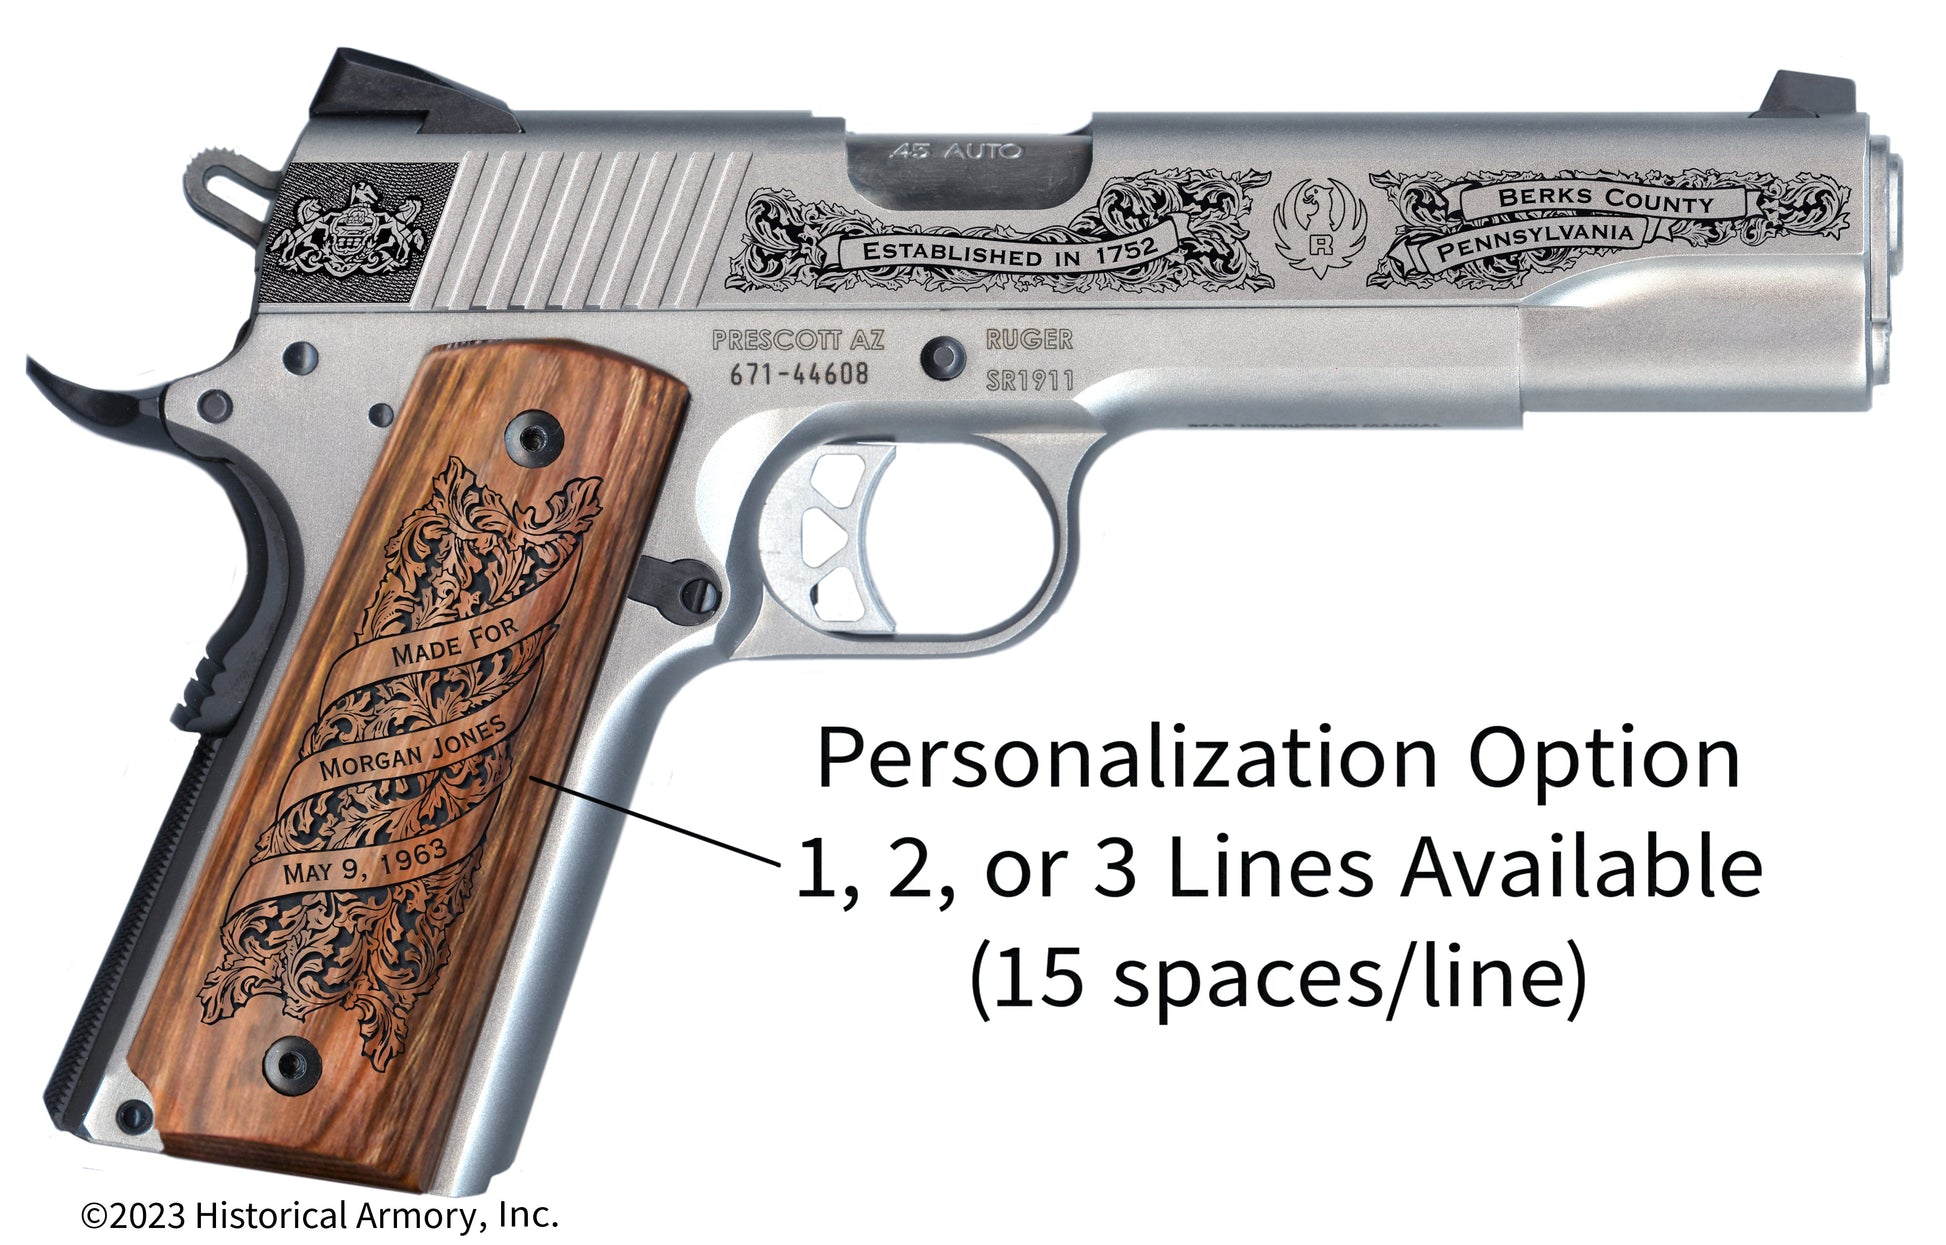 Berks County Pennsylvania Personalized Engraved .45 Auto Ruger 1911